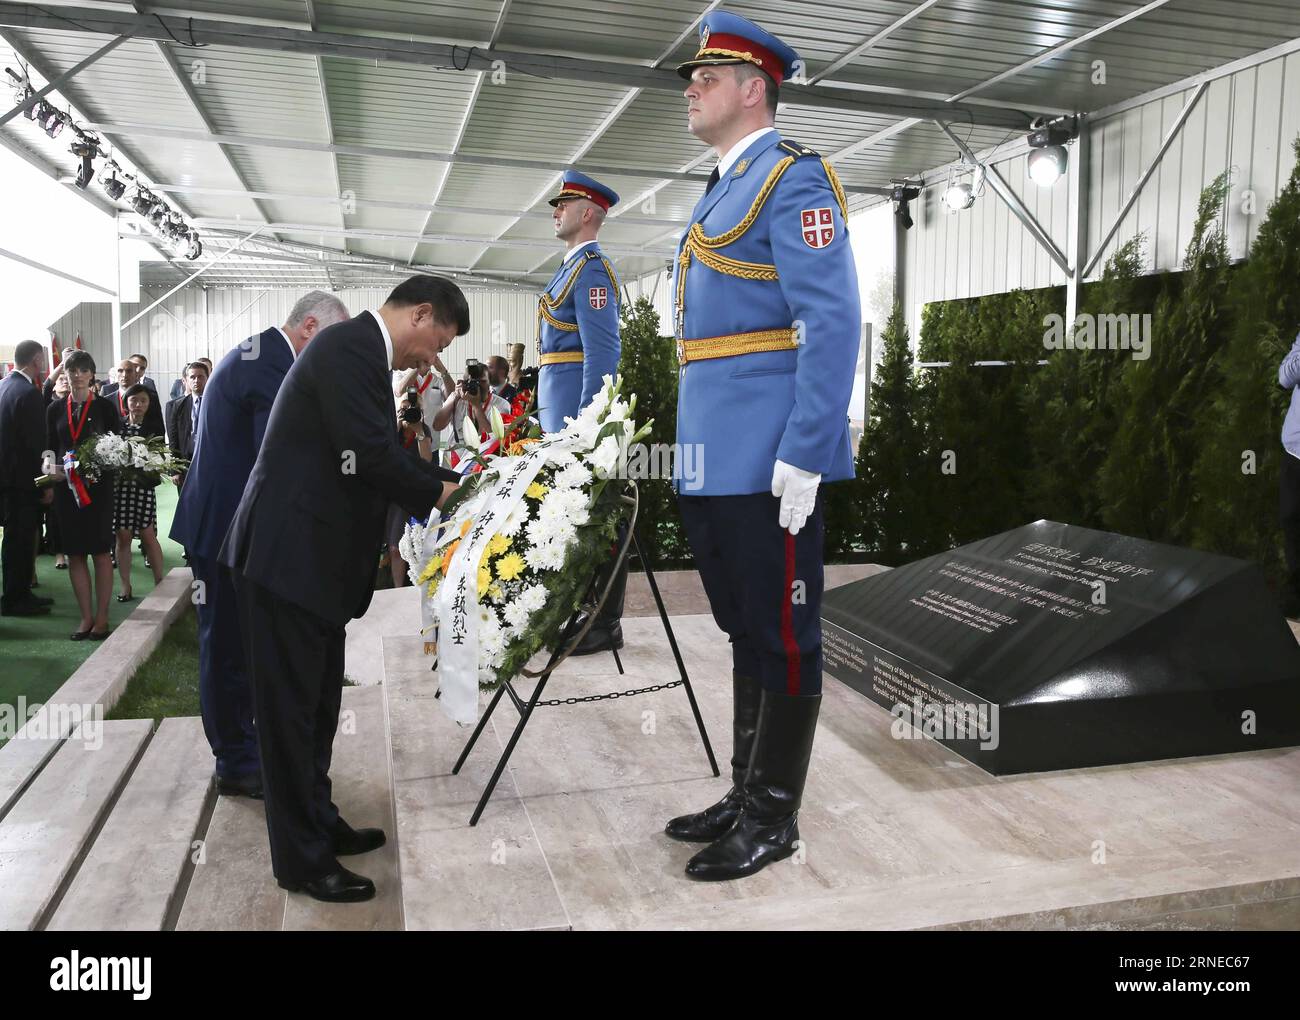 Chinese President Xi Jinping and his wife Peng Liyuan pay homage to the Chinese martyrs killed in the NATO bombing of the former Chinese embassy in the Federal Republic of Yugoslavia in May 1999, after arriving in Belgrade for a state visit to Serbia, June 17, 2016. The three martyrs were journalists Shao Yunhuan of Xinhua News Agency, and Xu Xinghu and his wife Zhu Ying, of the Guangming Daily newspaper. Lan Hongguang)(wjq) SERBIA-BELGRADE-CHINA-XI JINPING-VISIT LanxHonguang PUBLICATIONxNOTxINxCHN   Chinese President Xi Jinping and His wife Peng Liyuan Pay Homage to The Chinese Martyrs KILLED Stock Photo